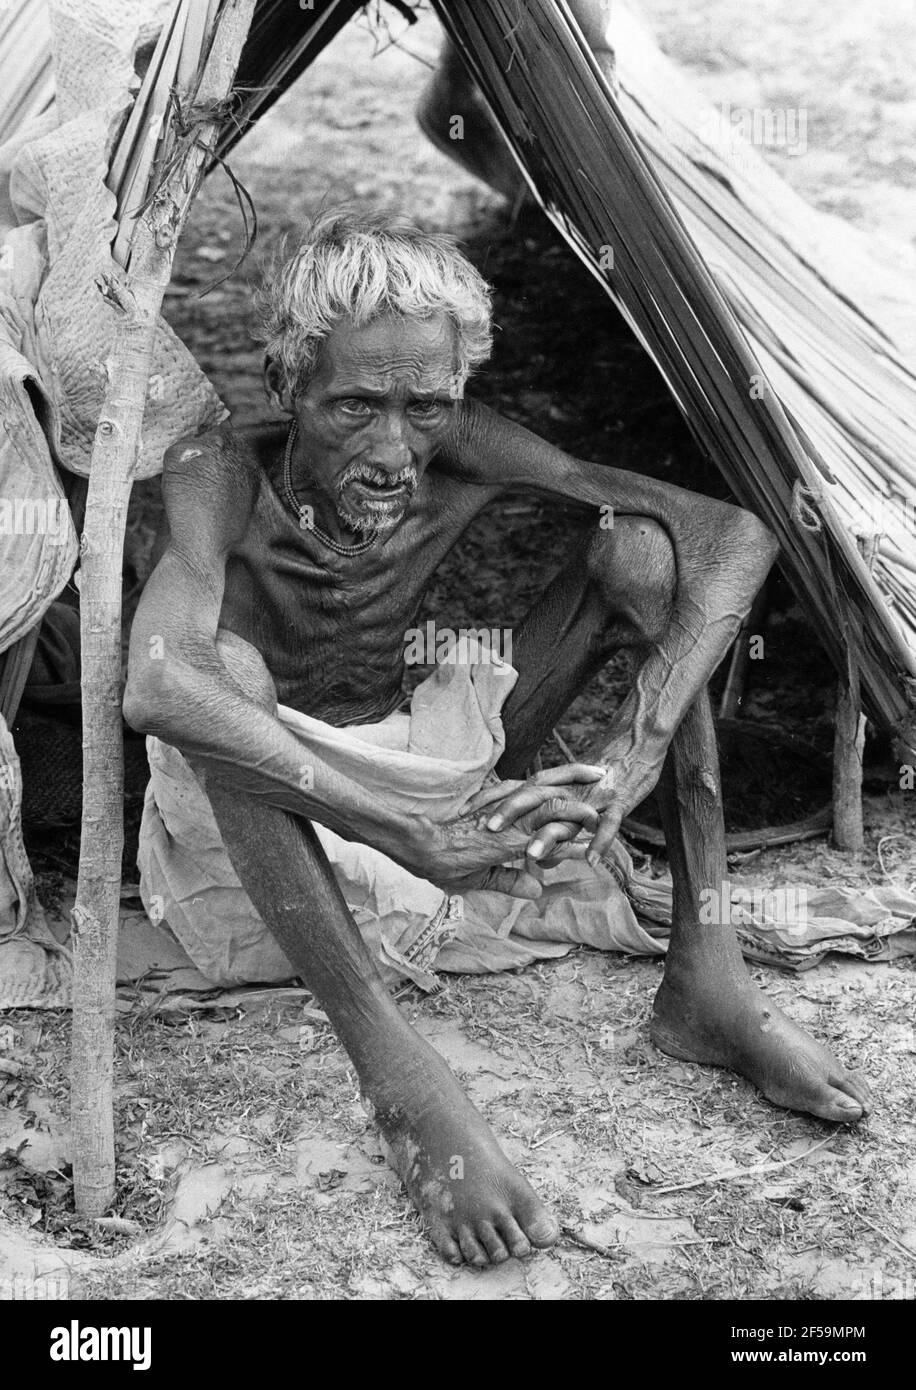 1971-06-24 An old man, suffering from cholera, sits under a dilapidated reed shelter in the Kalyani refugee camp.  Dressed in rags, they wander along the roads in the border region between East Pakistan and India. They belong to the army of the poor who have been forced to leave by West Pakistani troops. Their villages have been burnt down and in India, they are faced with new suffering.  Photo: Leif Engberg / DN / TT / code 15 Stock Photo